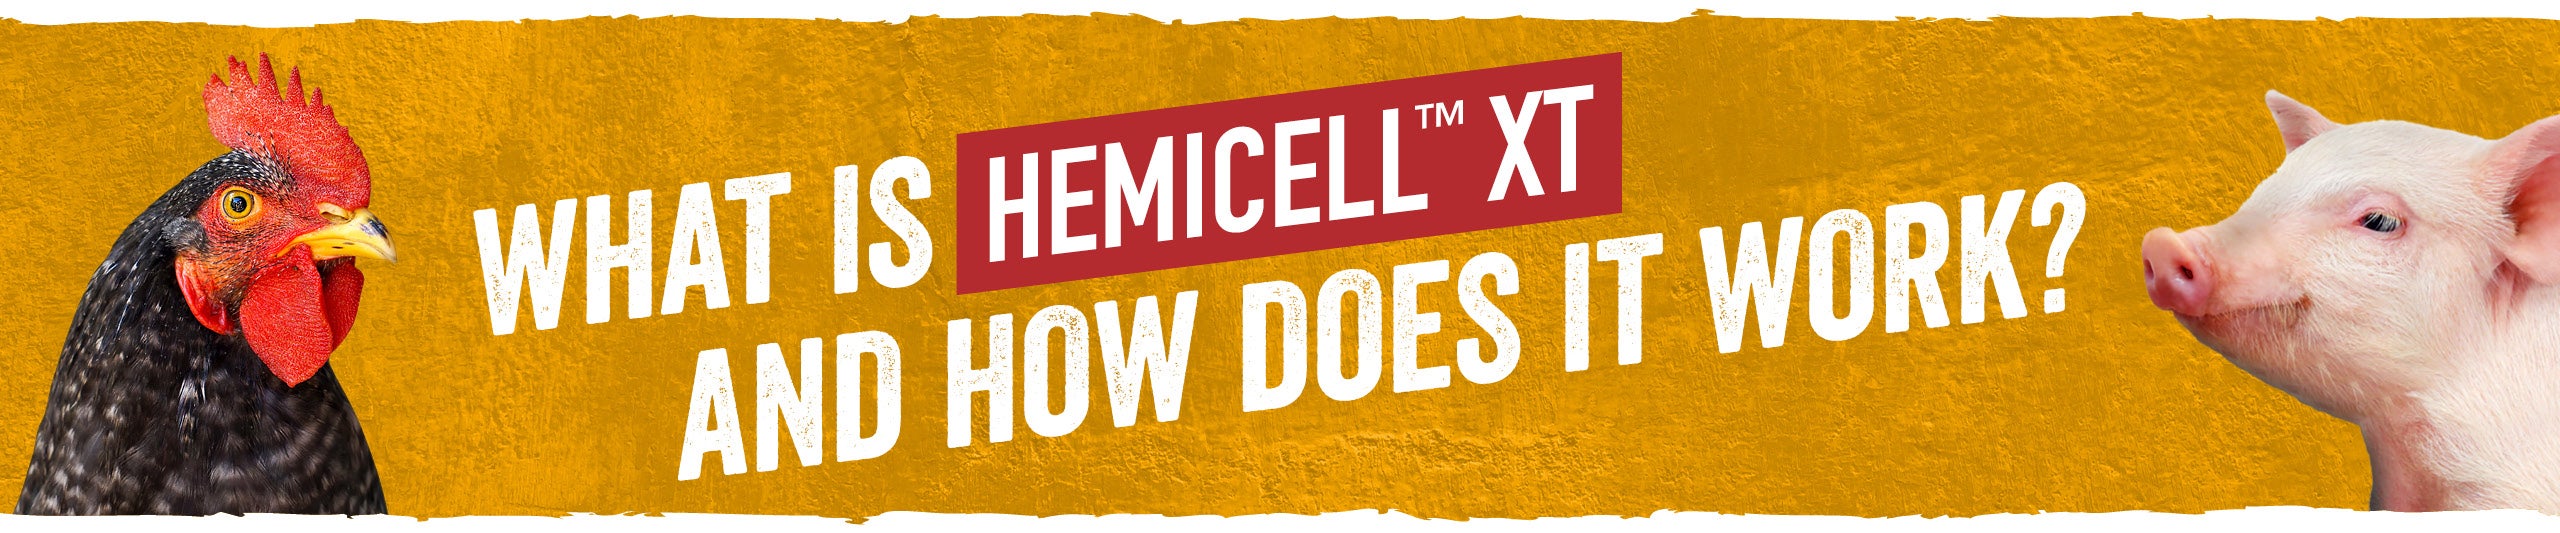 What is Hemicell XT and how does it work?